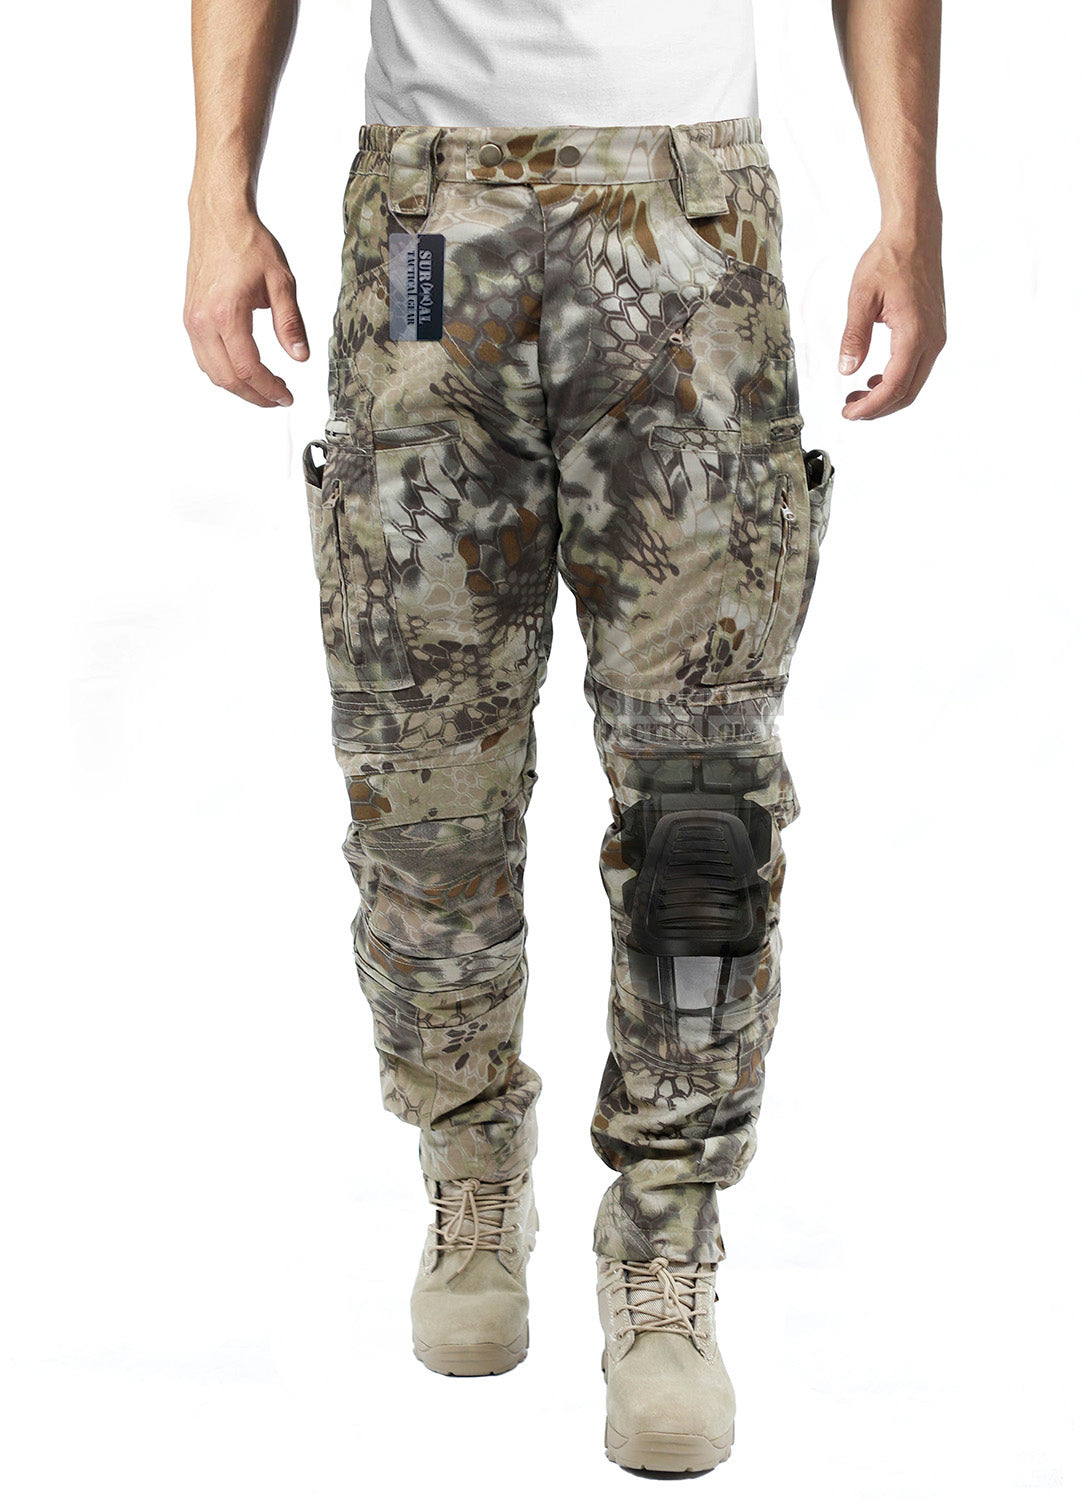 Tactical Pants with Knee Protection System & Air Circulation System